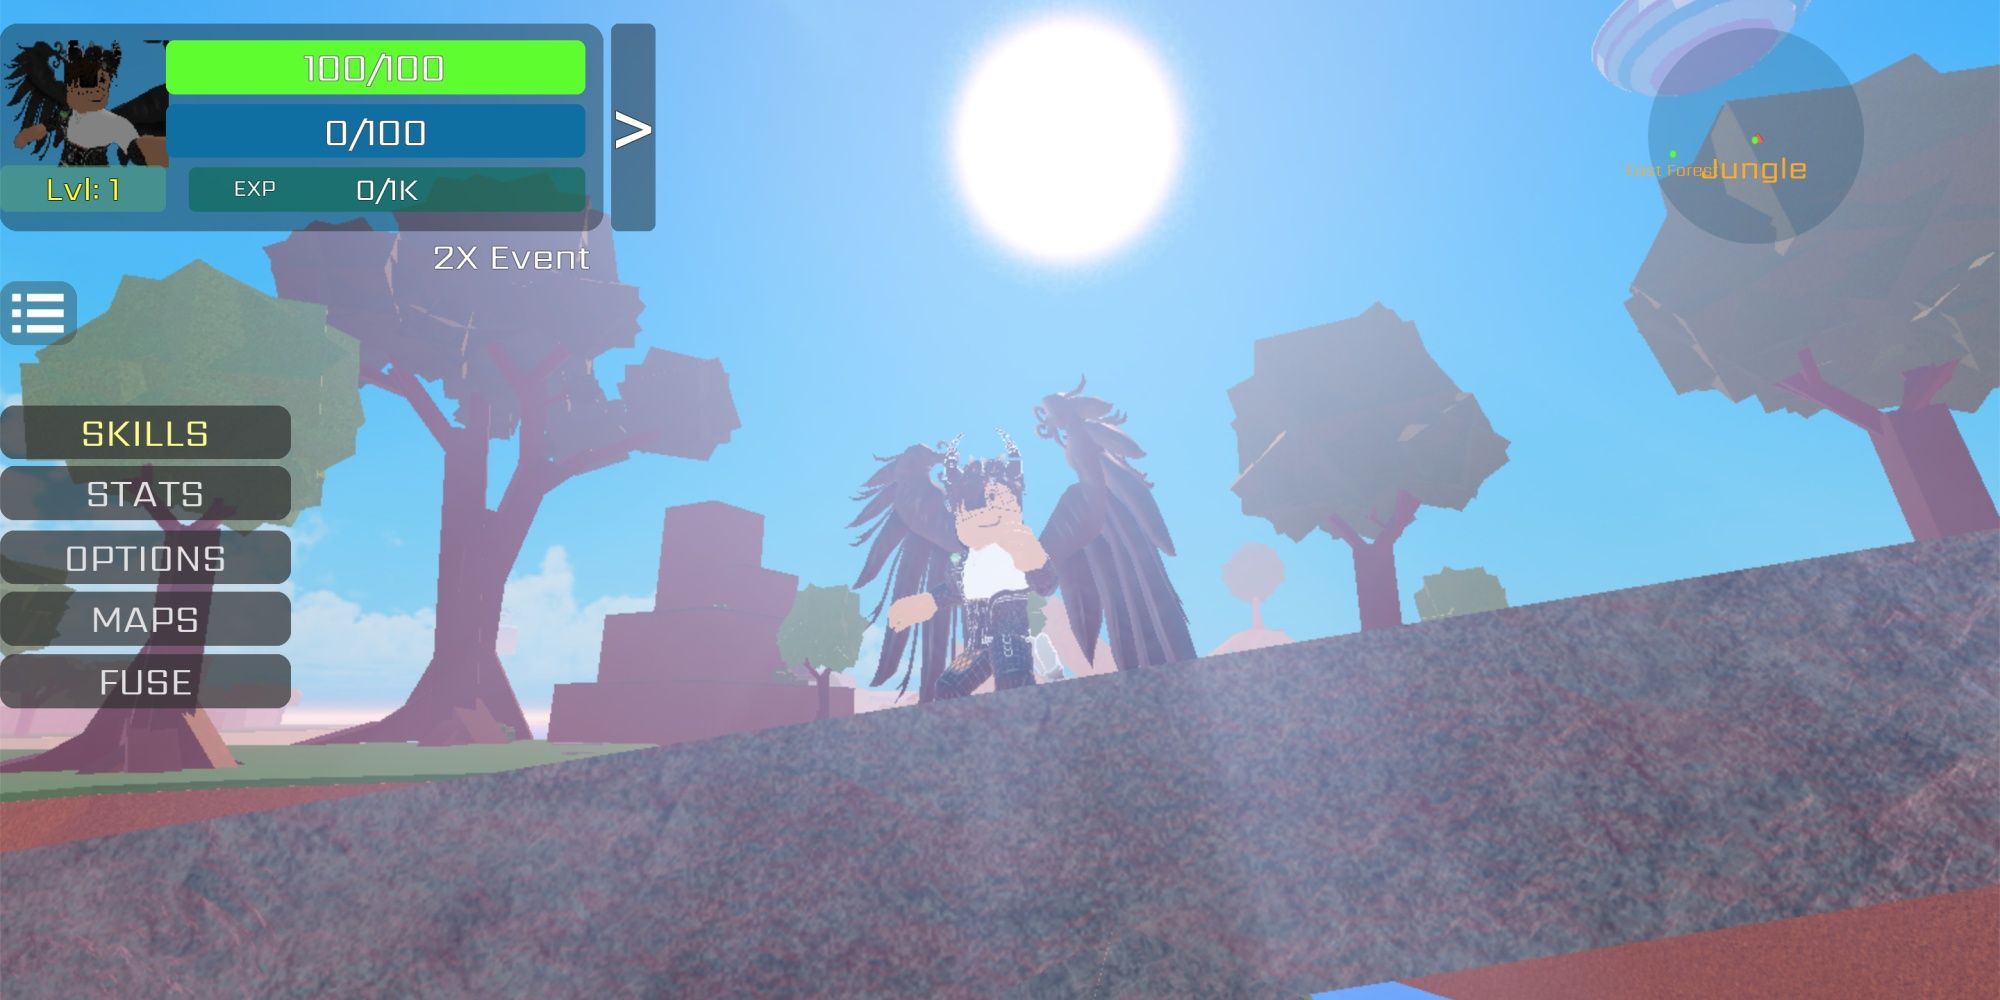 A level 1 Roblox player in Dragon Ball Hyper Blood